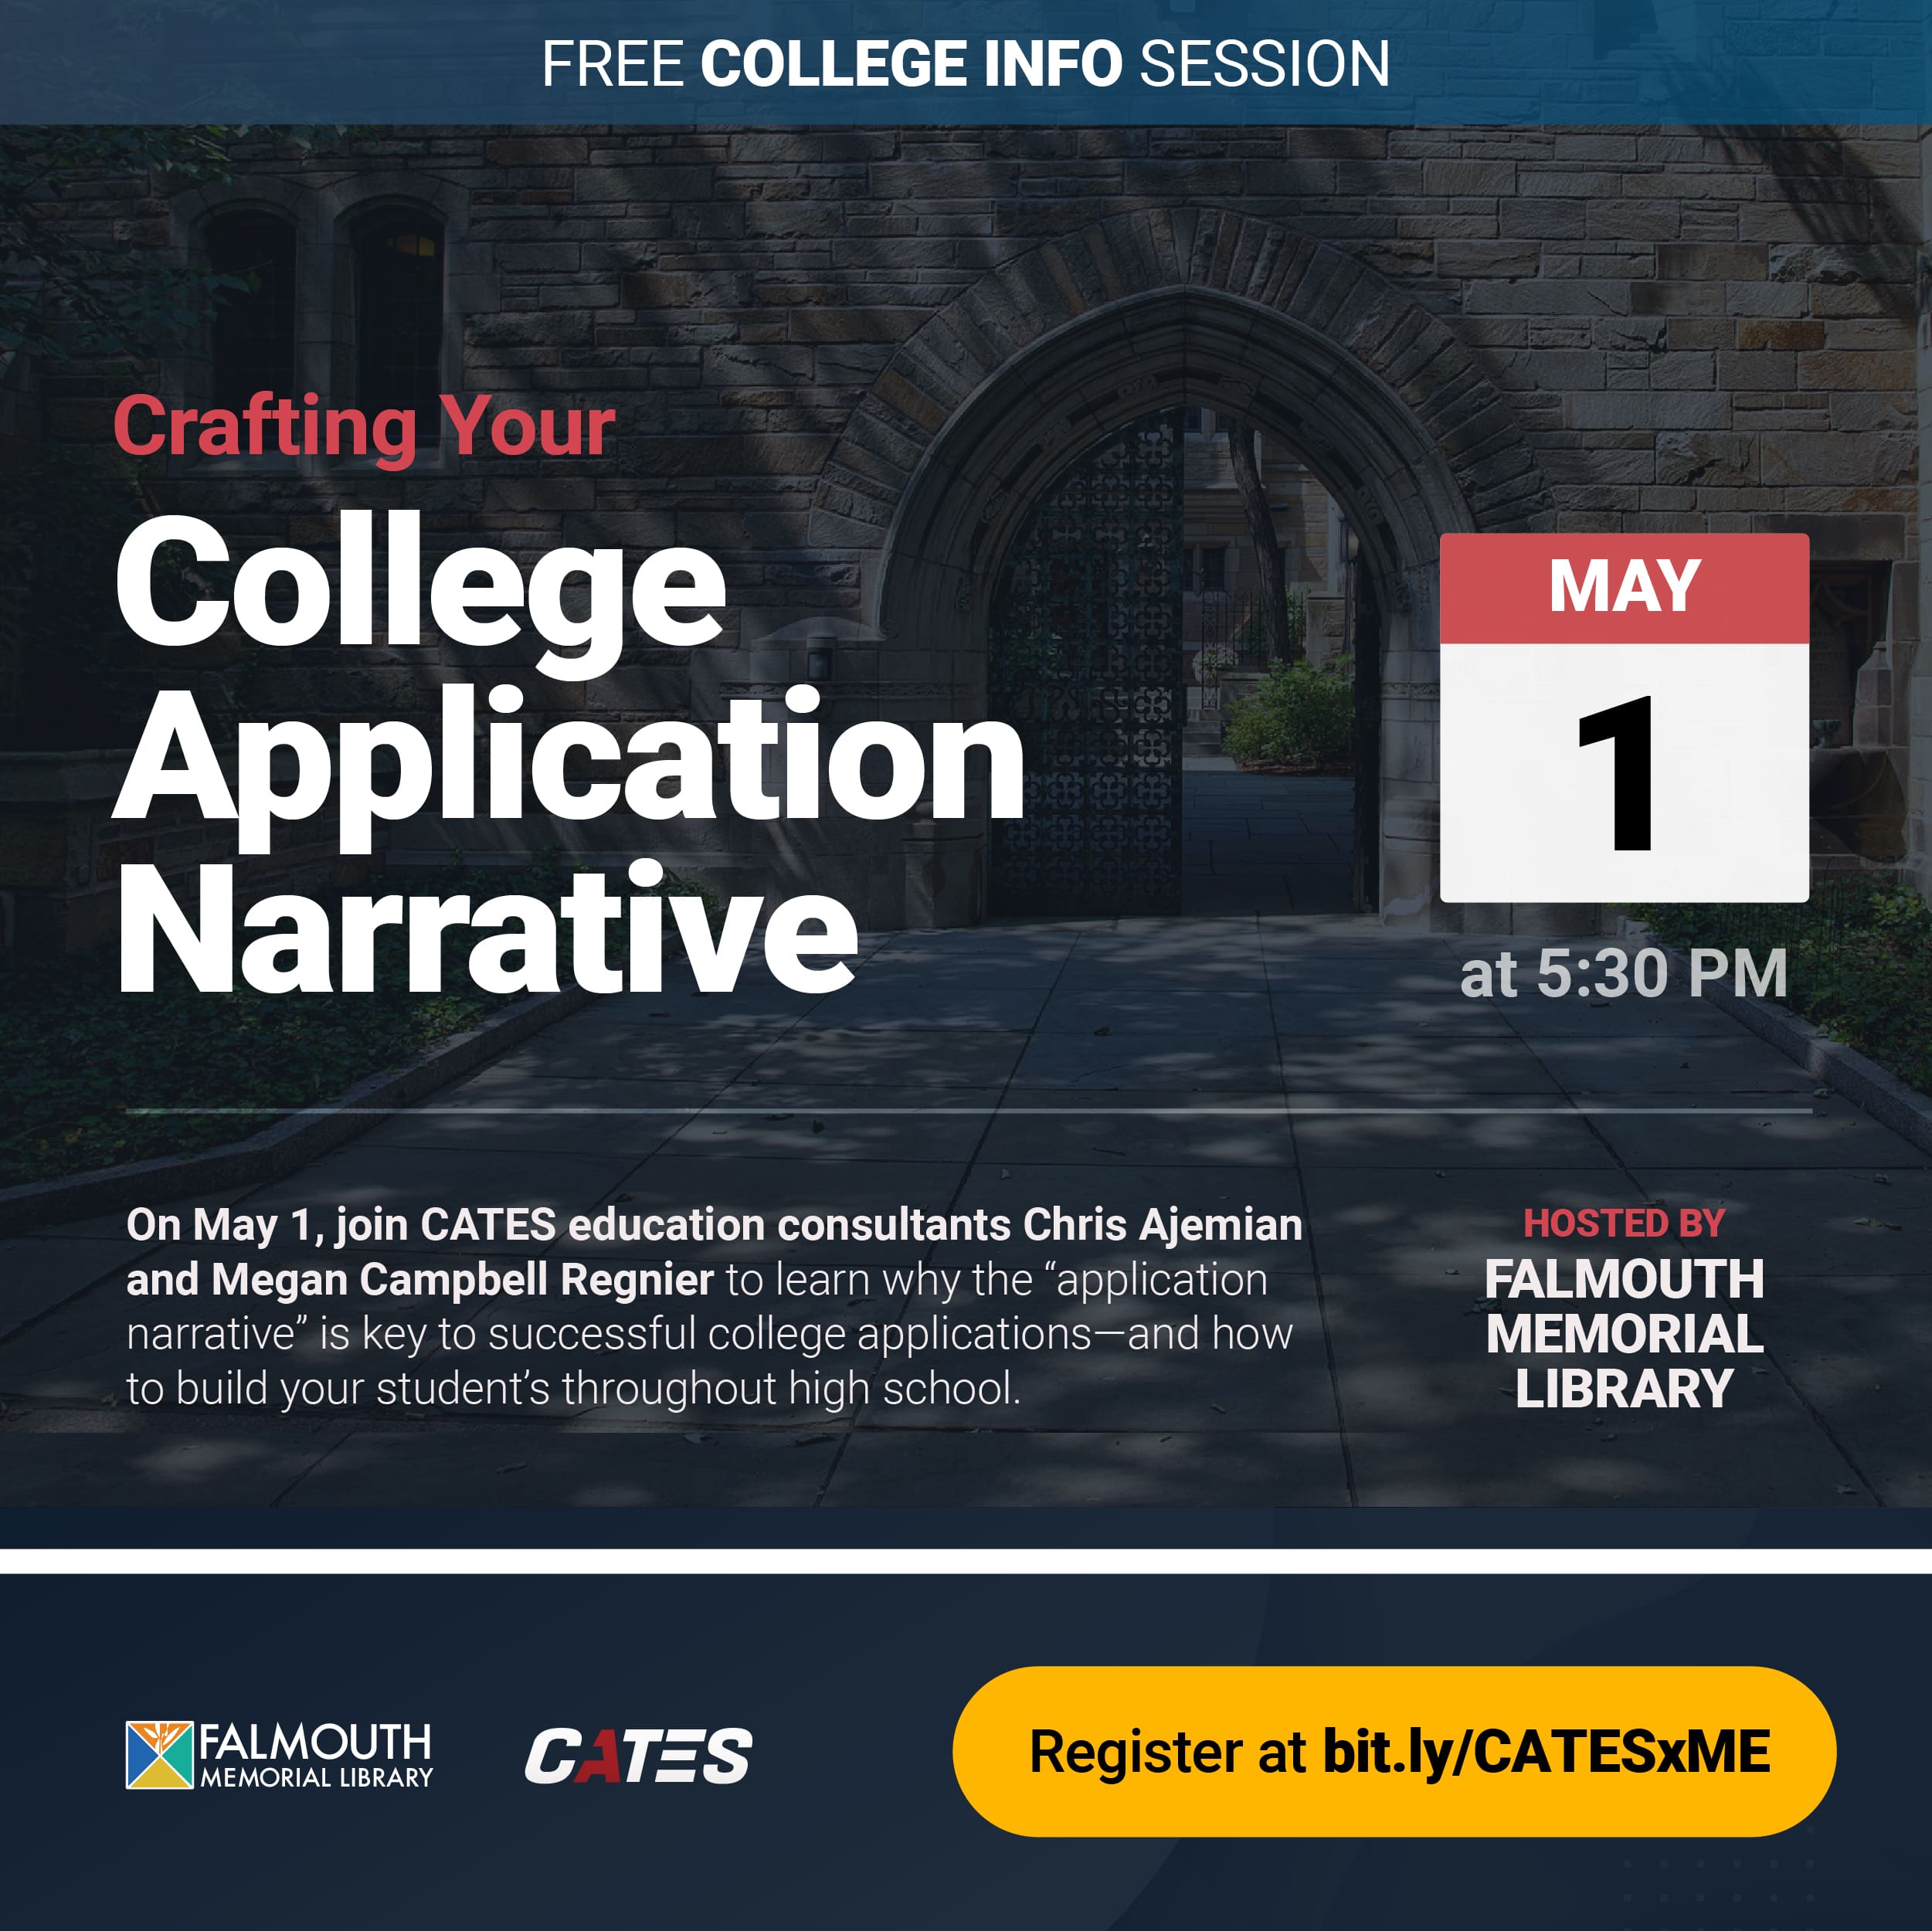 Crafting your college application narrative